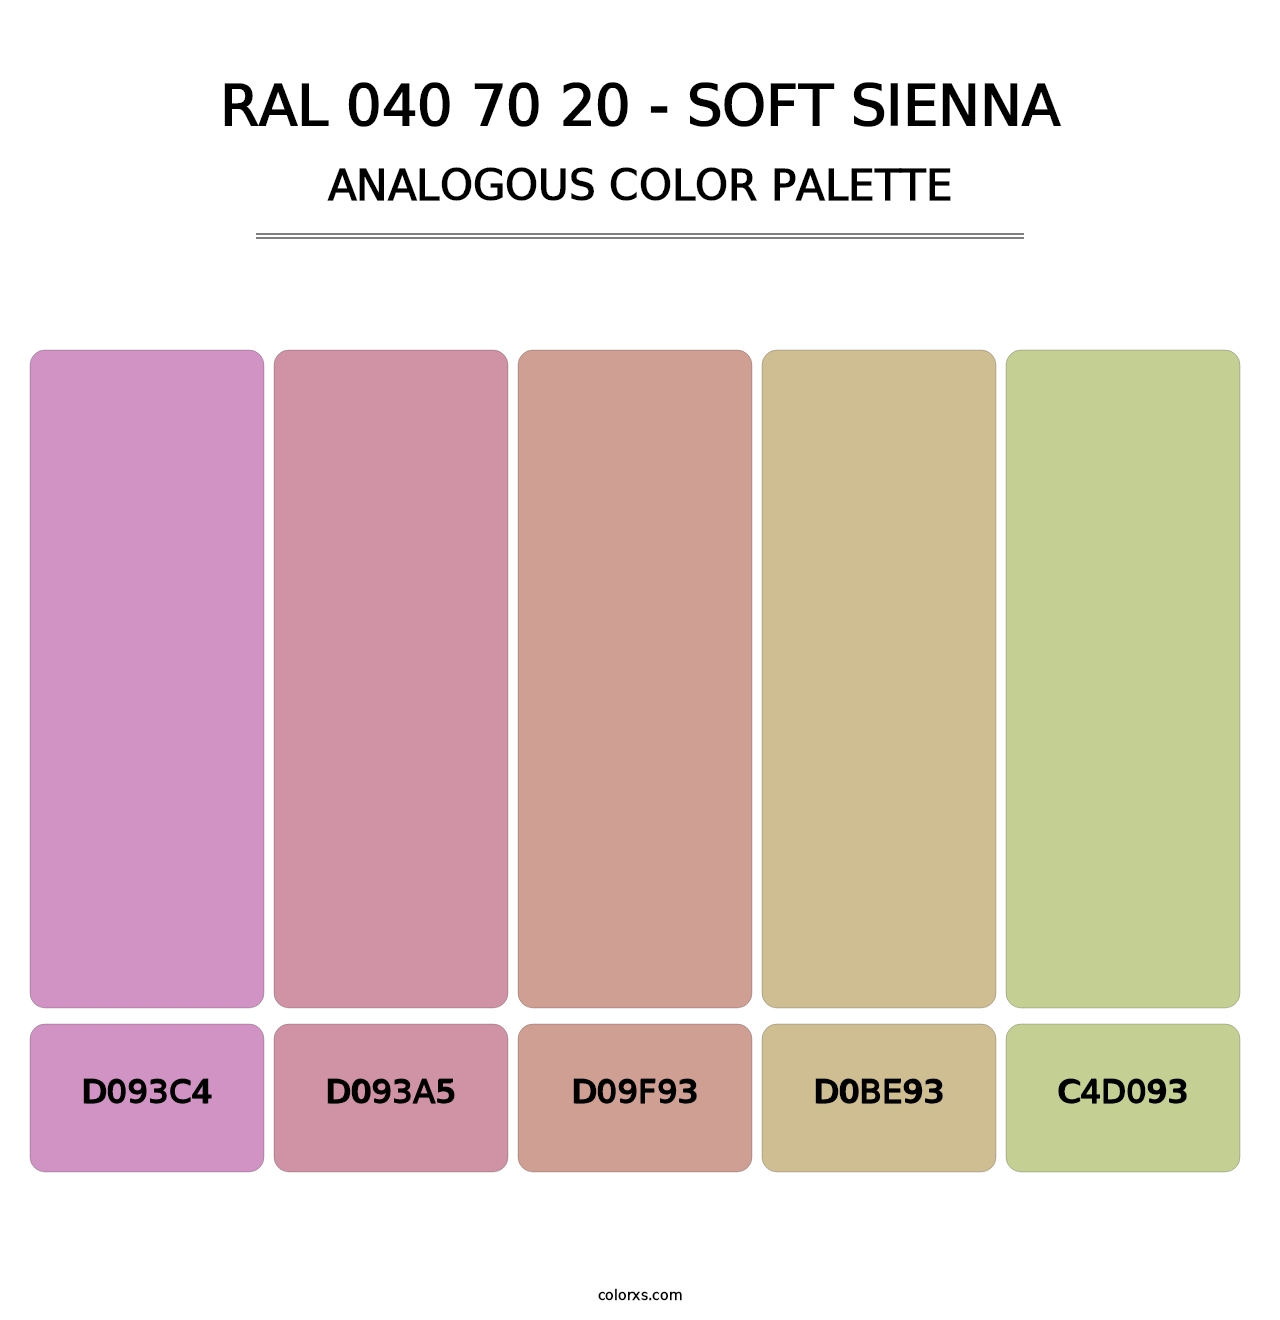 RAL 040 70 20 - Soft Sienna - Analogous Color Palette